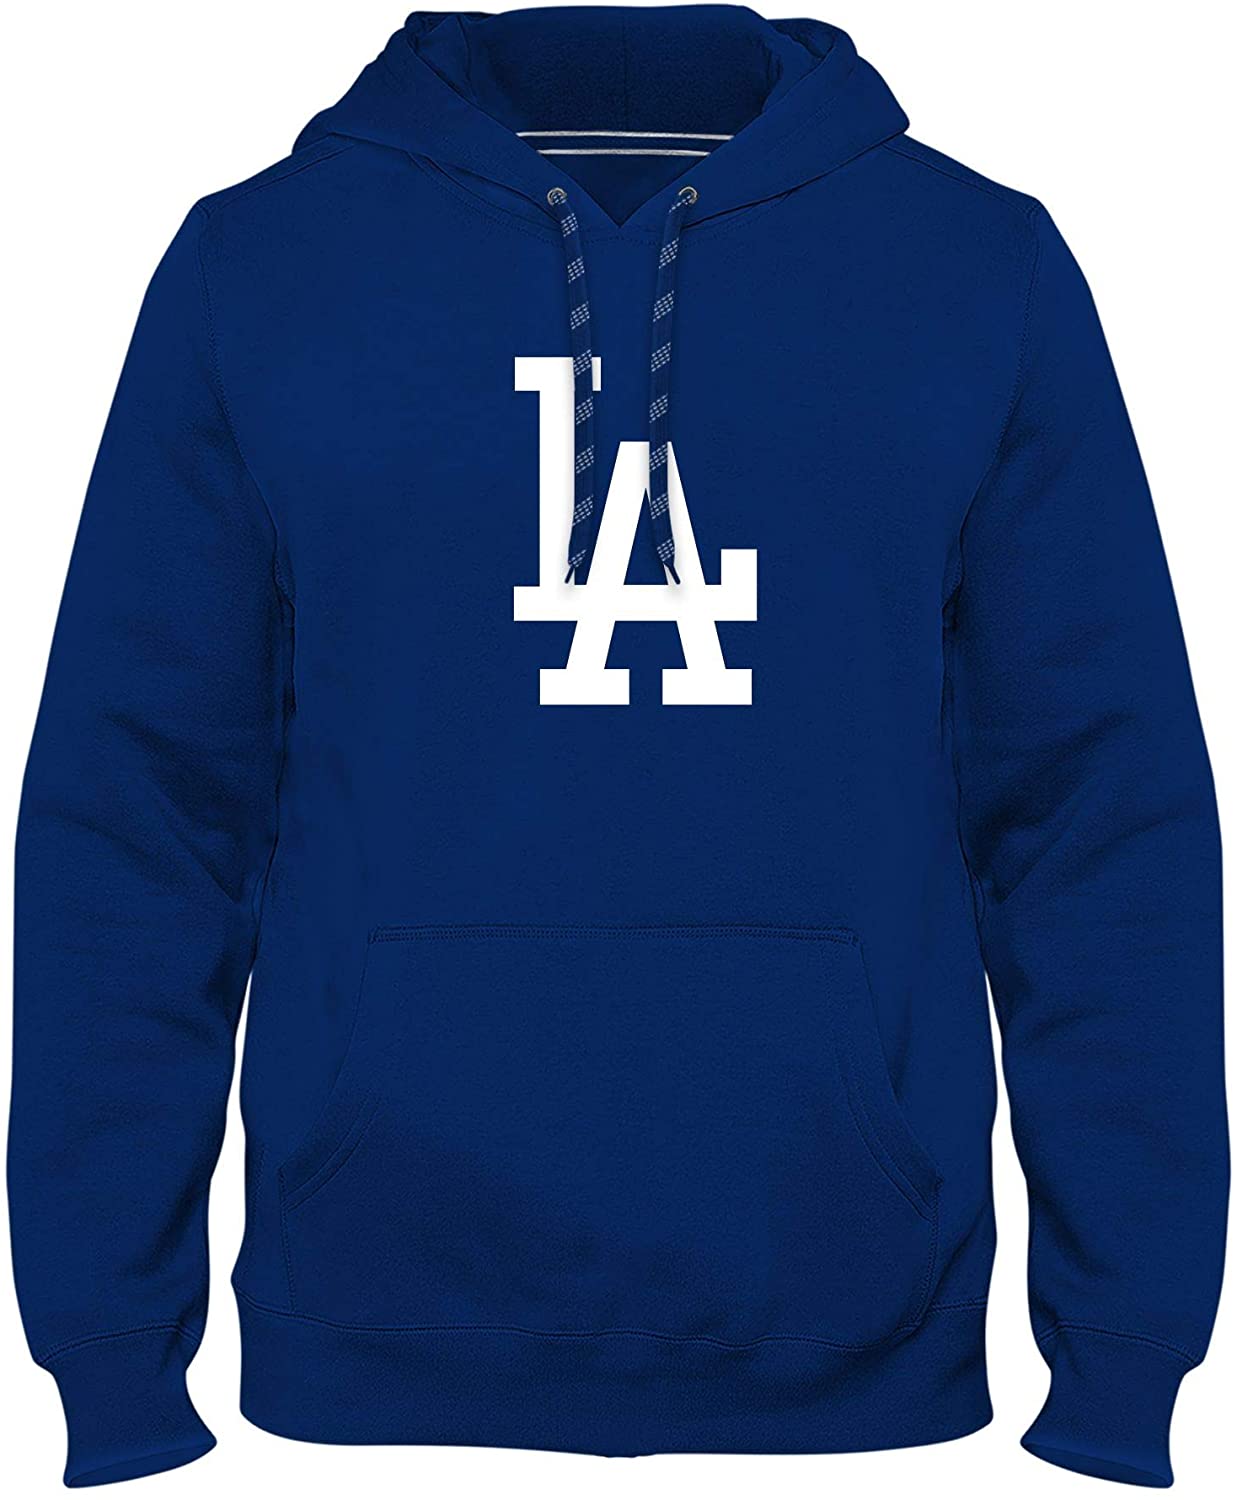 los dodgers sweater